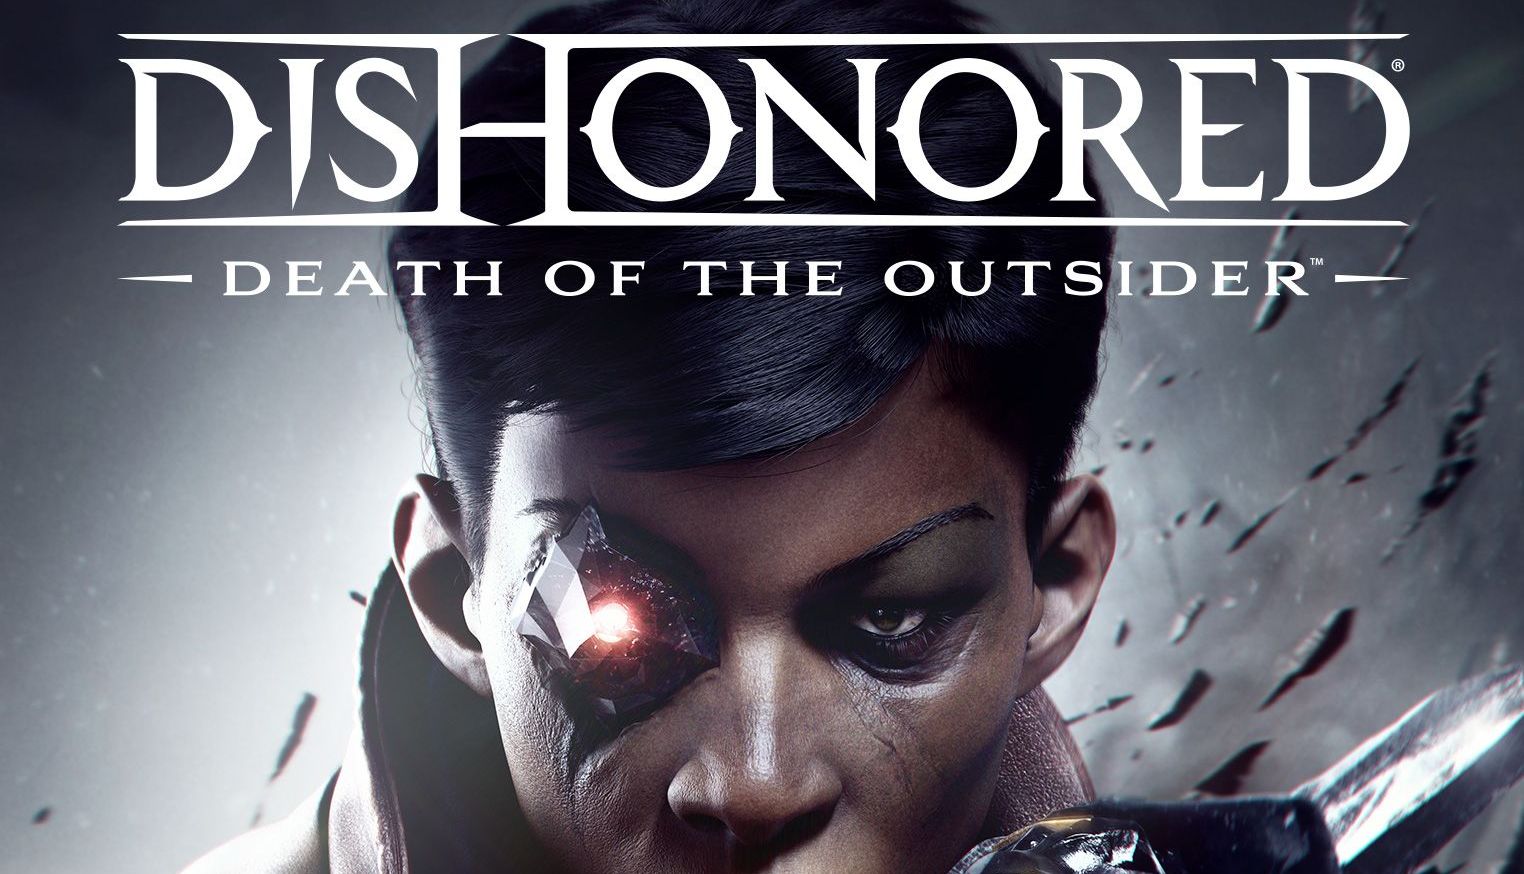 Dishonored- Death of the Outsider -GamersRD